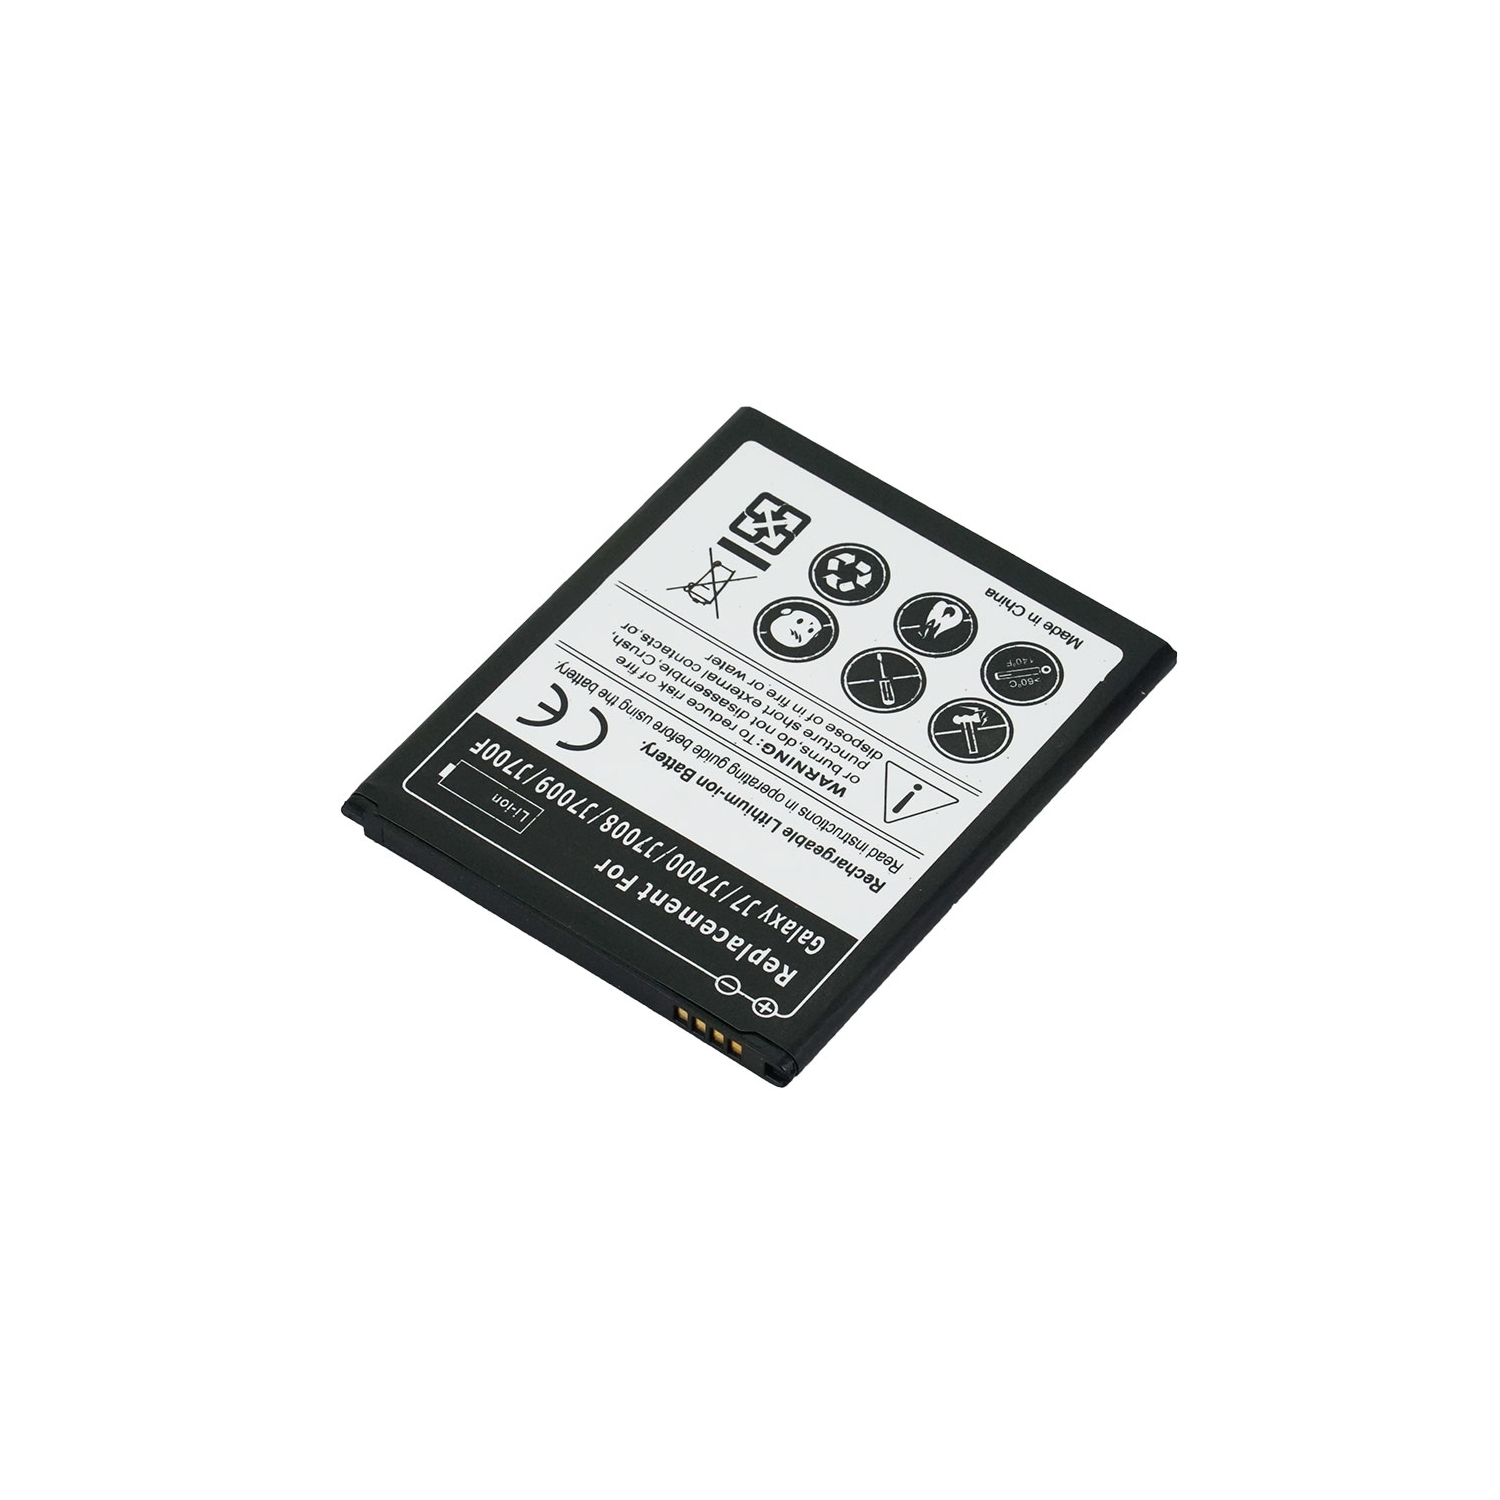 Dr. Battery - Canadian Brand Replacement Battery for Samsung Galaxy Galaxy J7 - Free Shipping - 1 year limited warranty